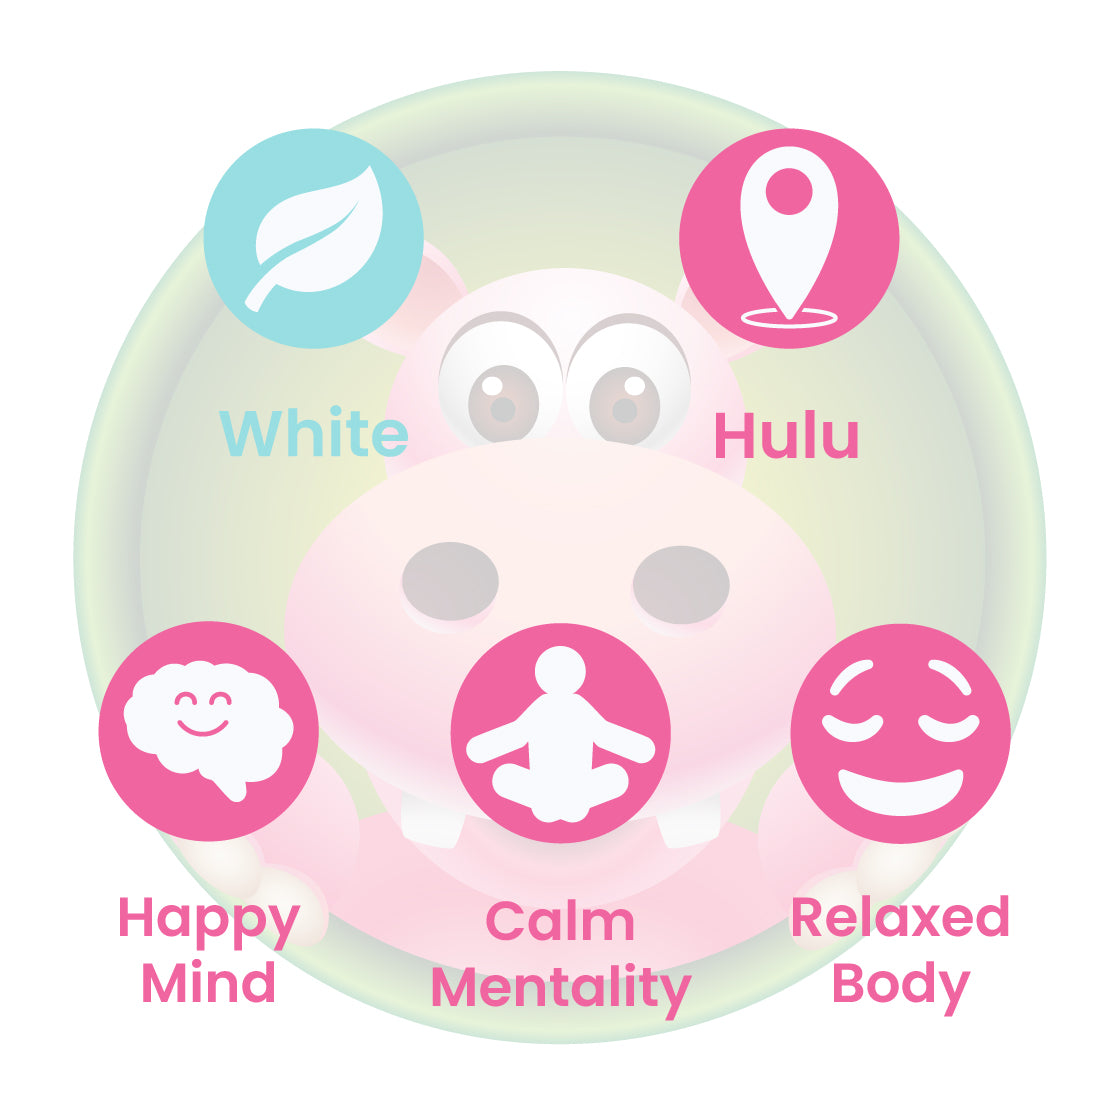 Infographic Details for Happy Hippo White Vein Hulu Kratom Powder. Leaf color: White Vein. Kratom Strain Origin: Hulu. Kratom Effects resonate with Happy Mind, Calm Mentality, and Relaxed Body.